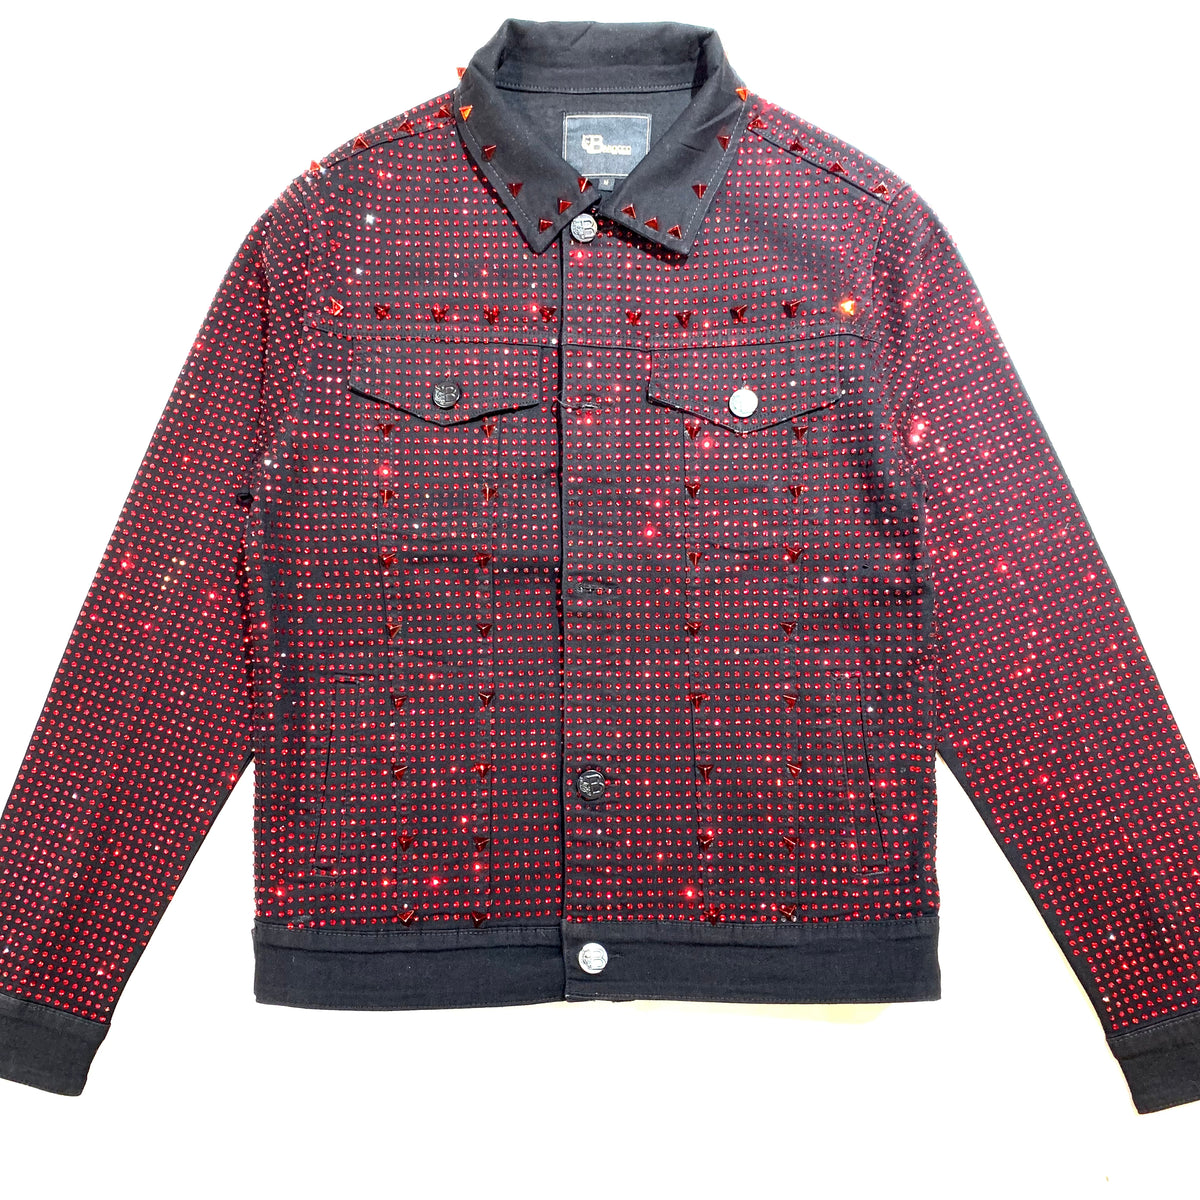 Barocco Black Fully Loaded Red Crystal Spiked Jean Jacket - Dudes Boutique